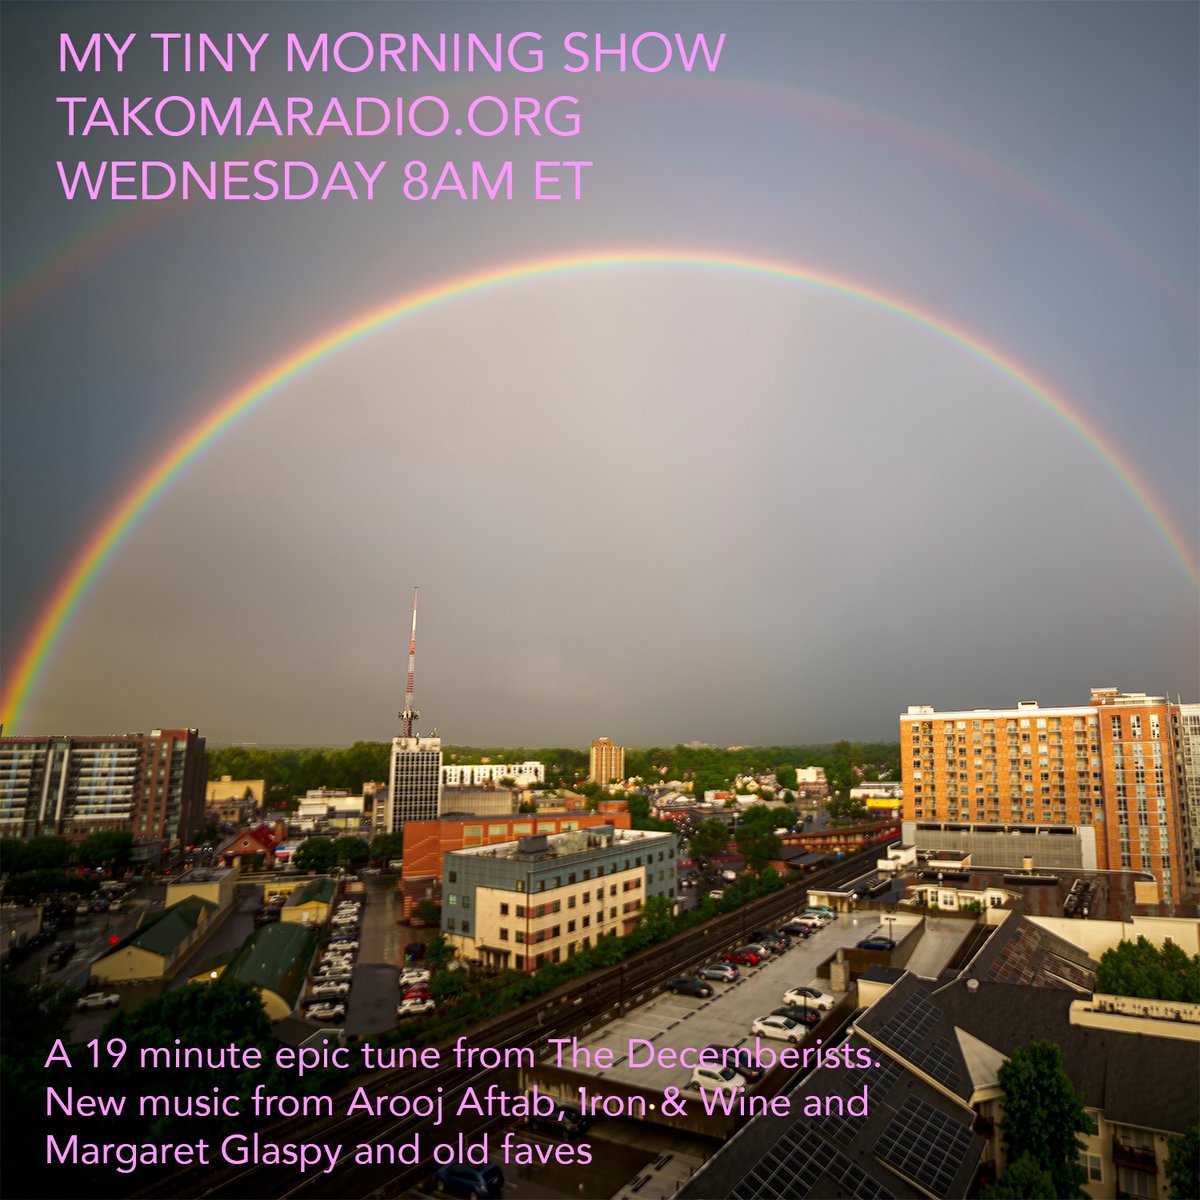 My Tiny Morning Show with a 19-minute epic tune from The Decemberists, new Arooj Aftab, Iron & Wine, Margaret Glaspy, and old faves including Eno & Byrne and The Antlers. Listen To Bob on Takoma Radio, Wednesday, 8am ET,
takomaradio.org/schedule
Archived mixcloud.com/bob-boilen/